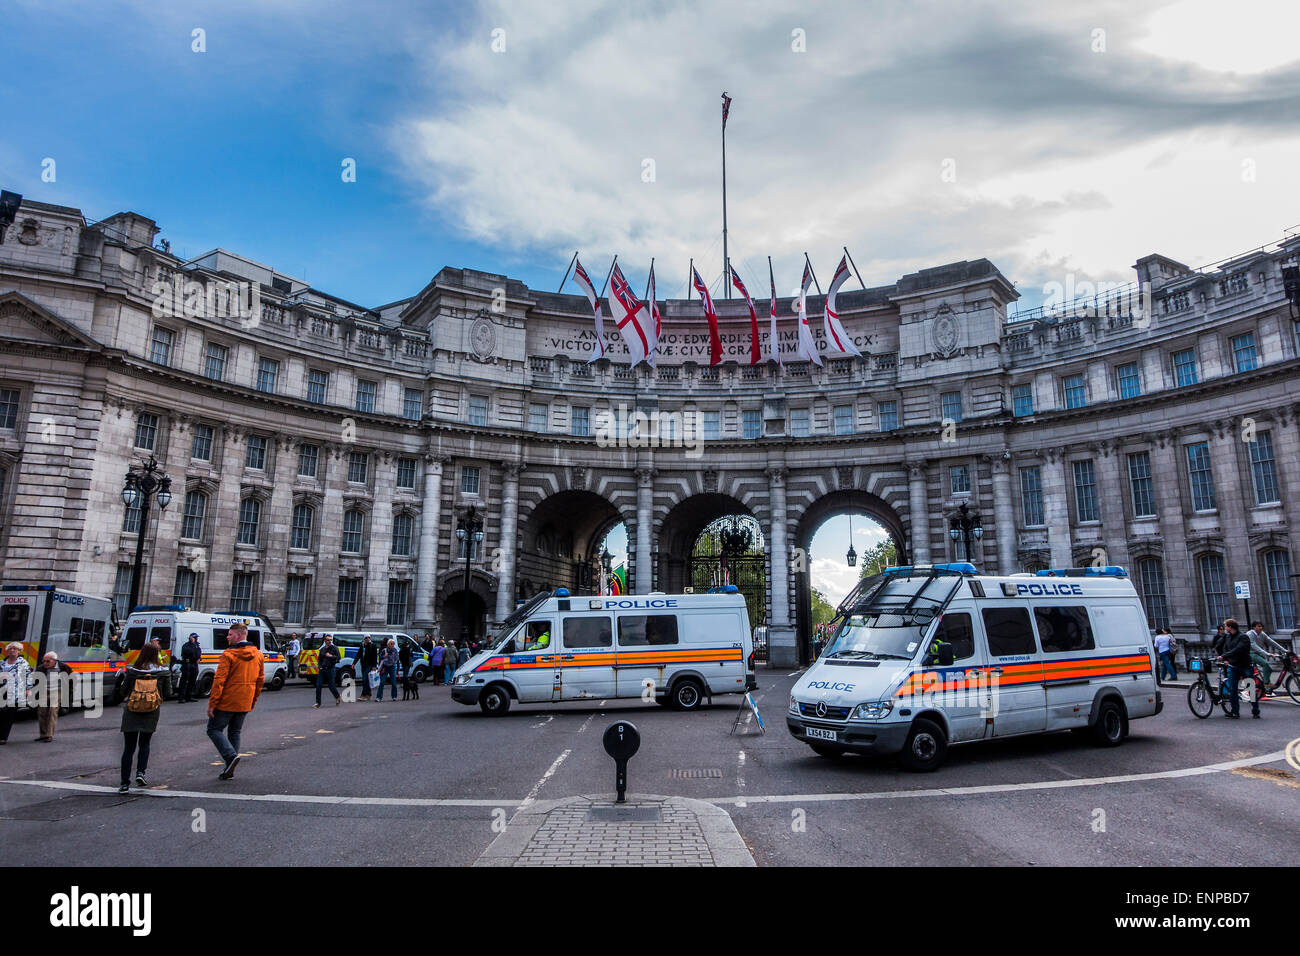 London, UK. 09th May, 2015. Police vans guard Admirallty arch in case a couple of protest marches spill over into the people arriving for the evening concert. VE Day 70 commemorations - Three days of events in London and across the UK marking historic anniversary of end of the Second World War in Europe. Credit:  Guy Bell/Alamy Live News Stock Photo